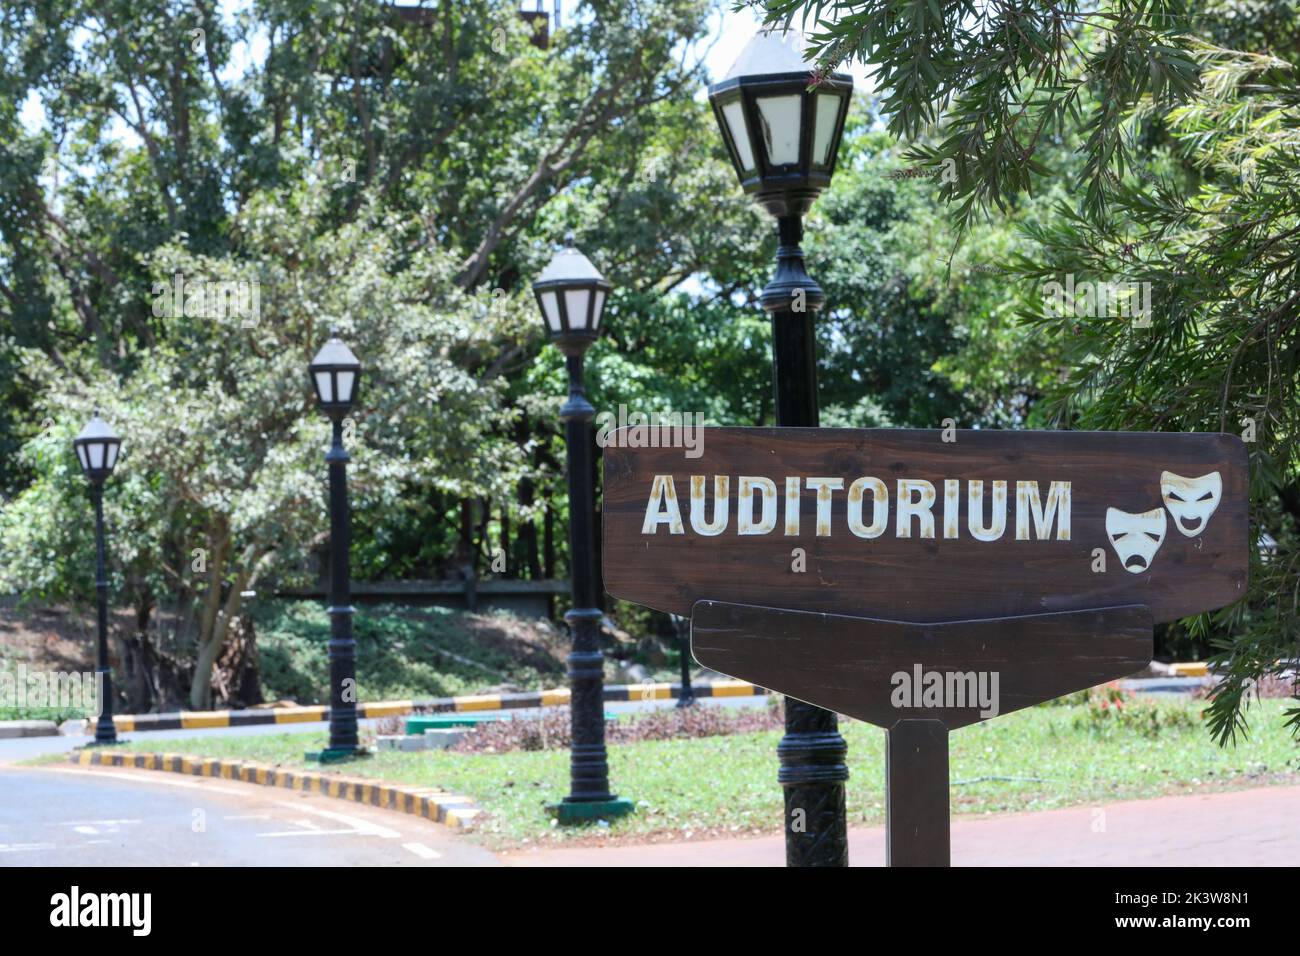 auditorium indication plate made of wood and stones Stock Photo